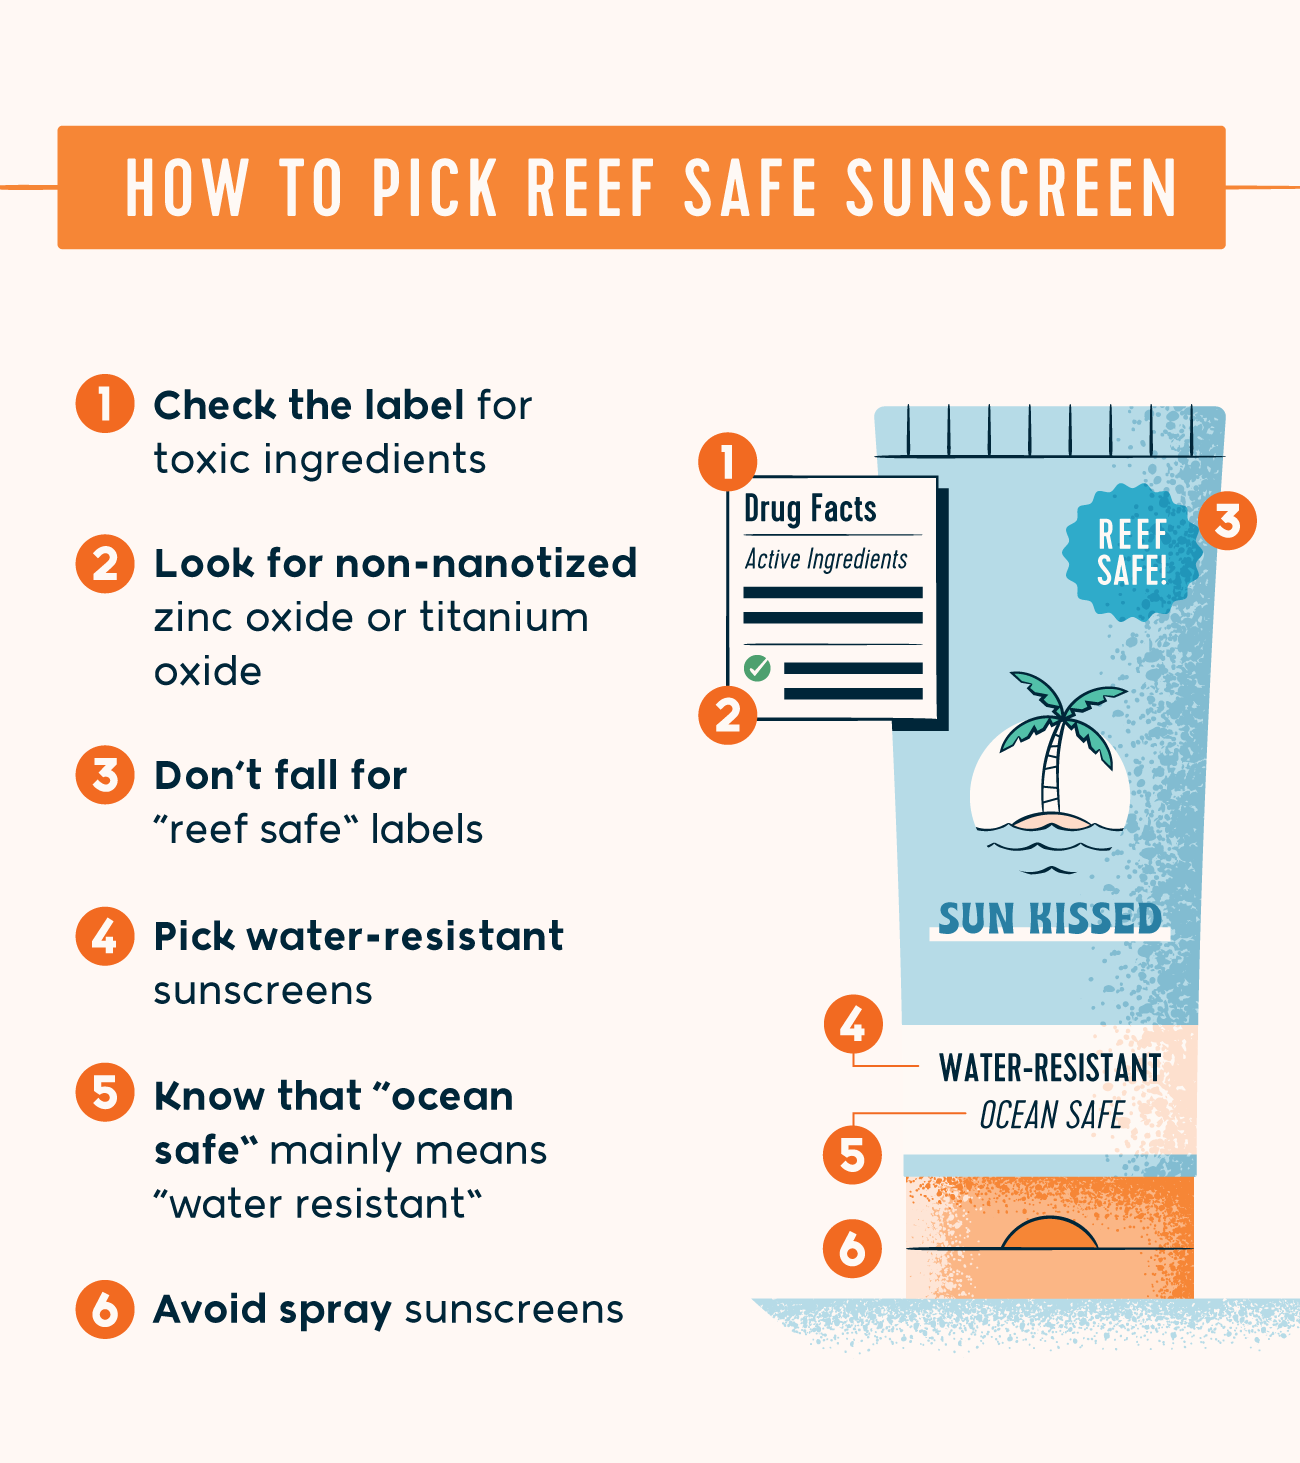 how to pick reef safe sunscreen -check label for toxic ingredients, avoid sprays, pick water-resistant 